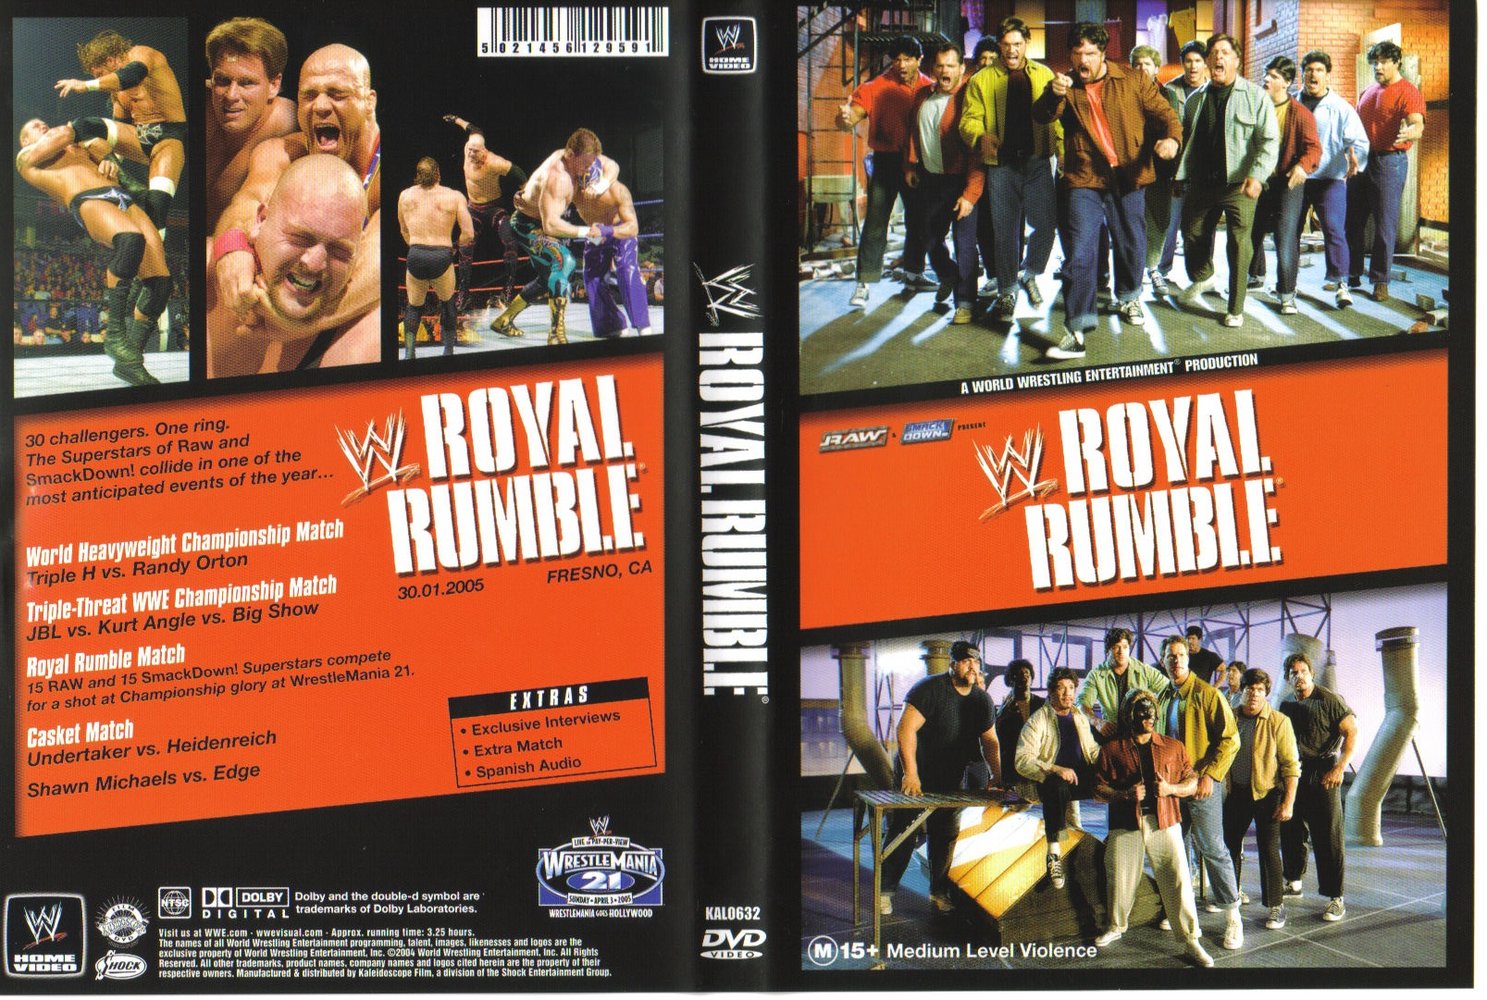 Jaquette DVD Wwe Royal Rumble 2005